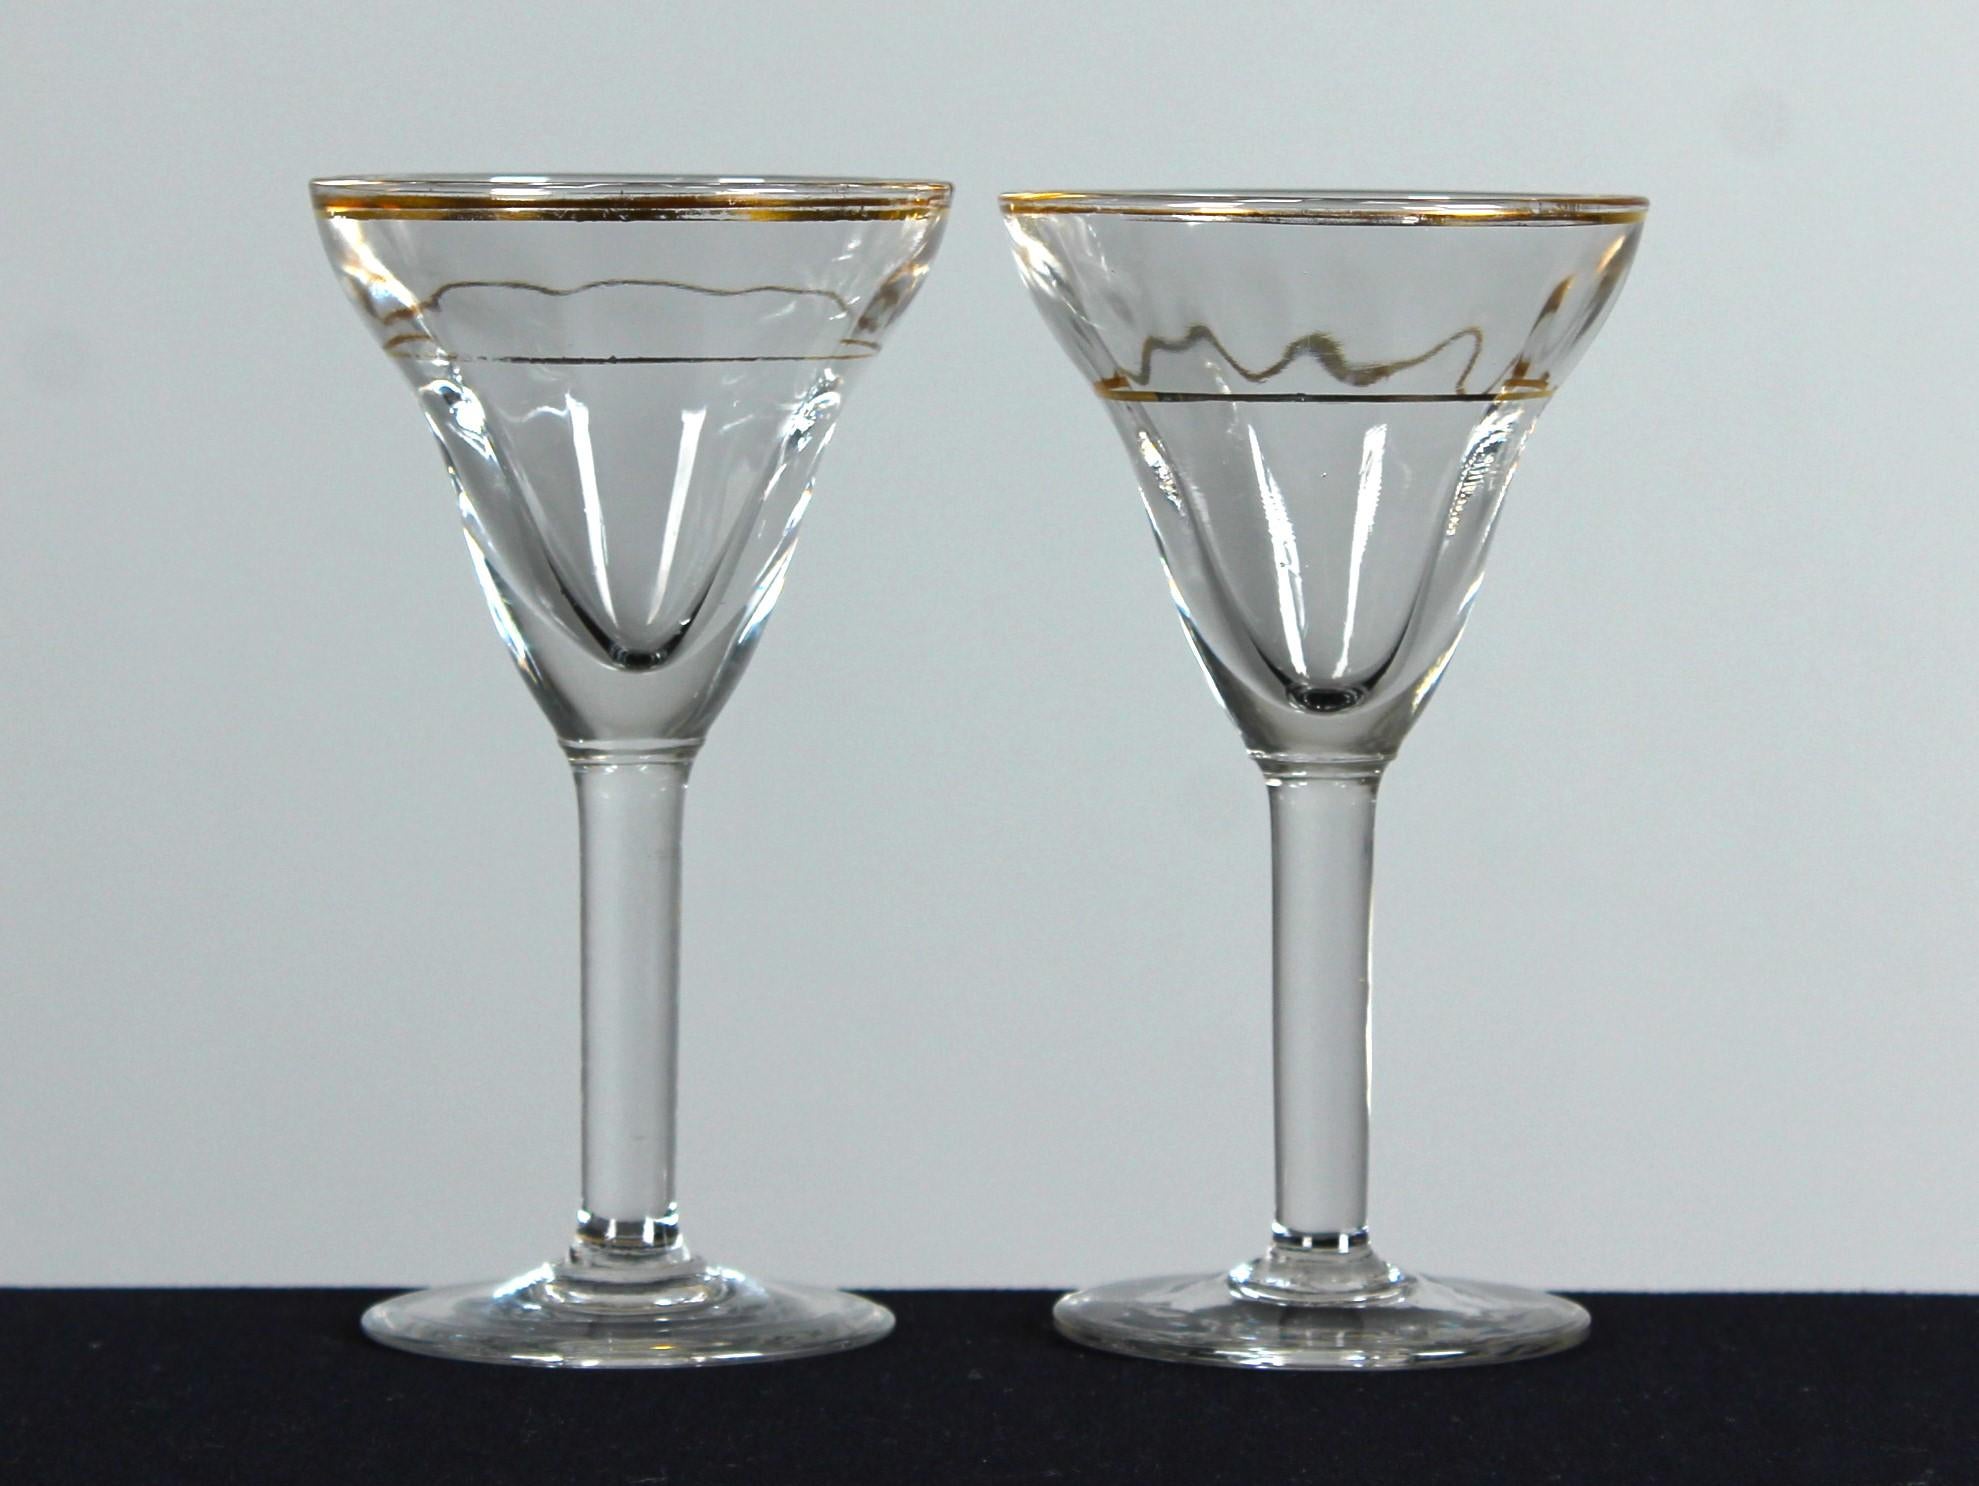 A beautiful set of two antique wine glasses with decorative golden design.

In 19th century France, the art of glassmaking experienced a renaissance inspired by the rich history and heritage of ancient techniques. Antique glasses from this era are